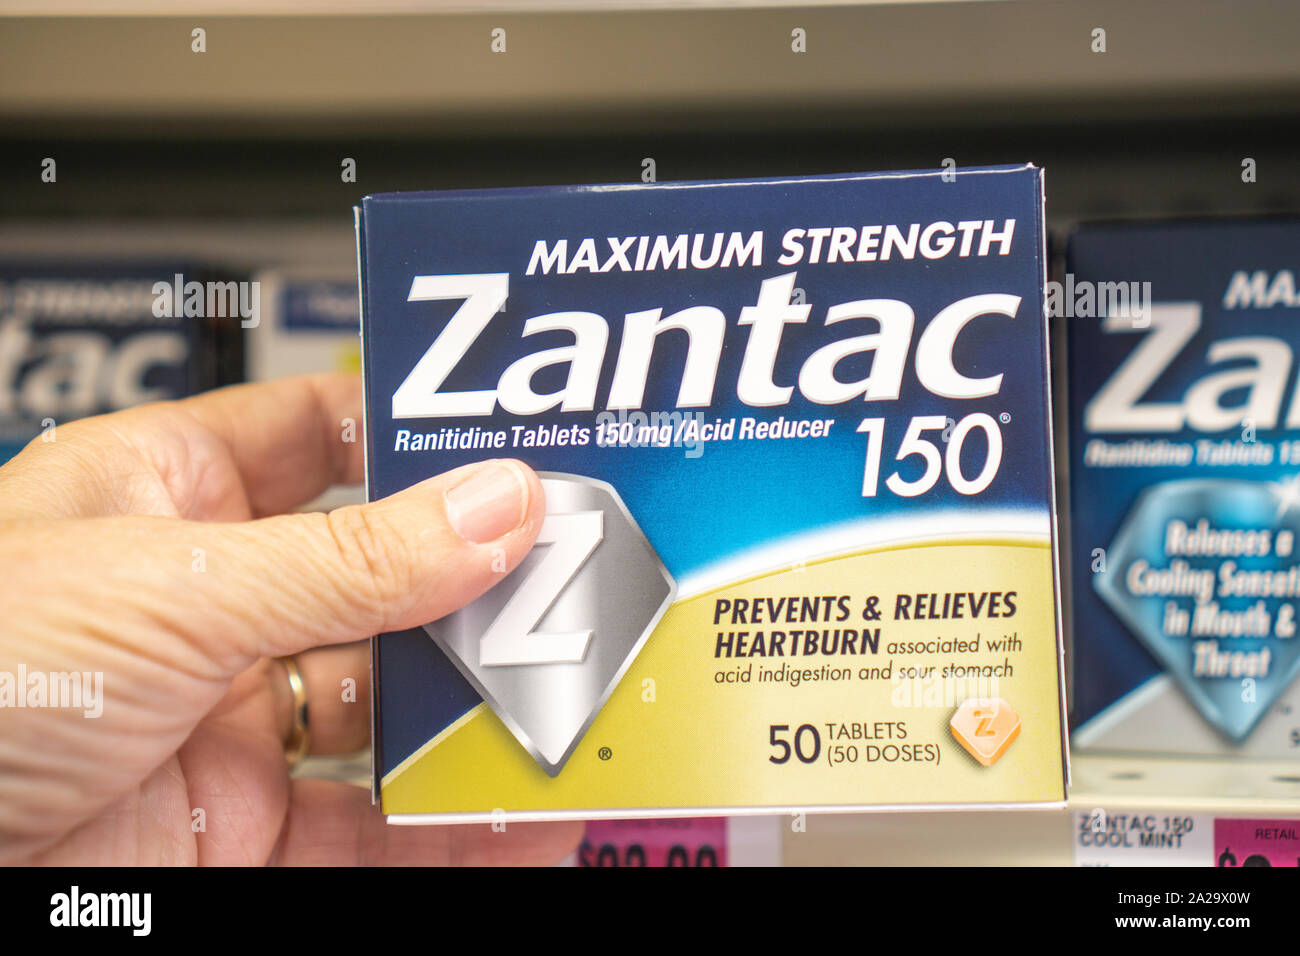 September 15, 2019, Berks County, Pennsylvania: Over the counter Zantac used for acid reflux and heartburn, according to FDA may contain carcinogen. Stock Photo